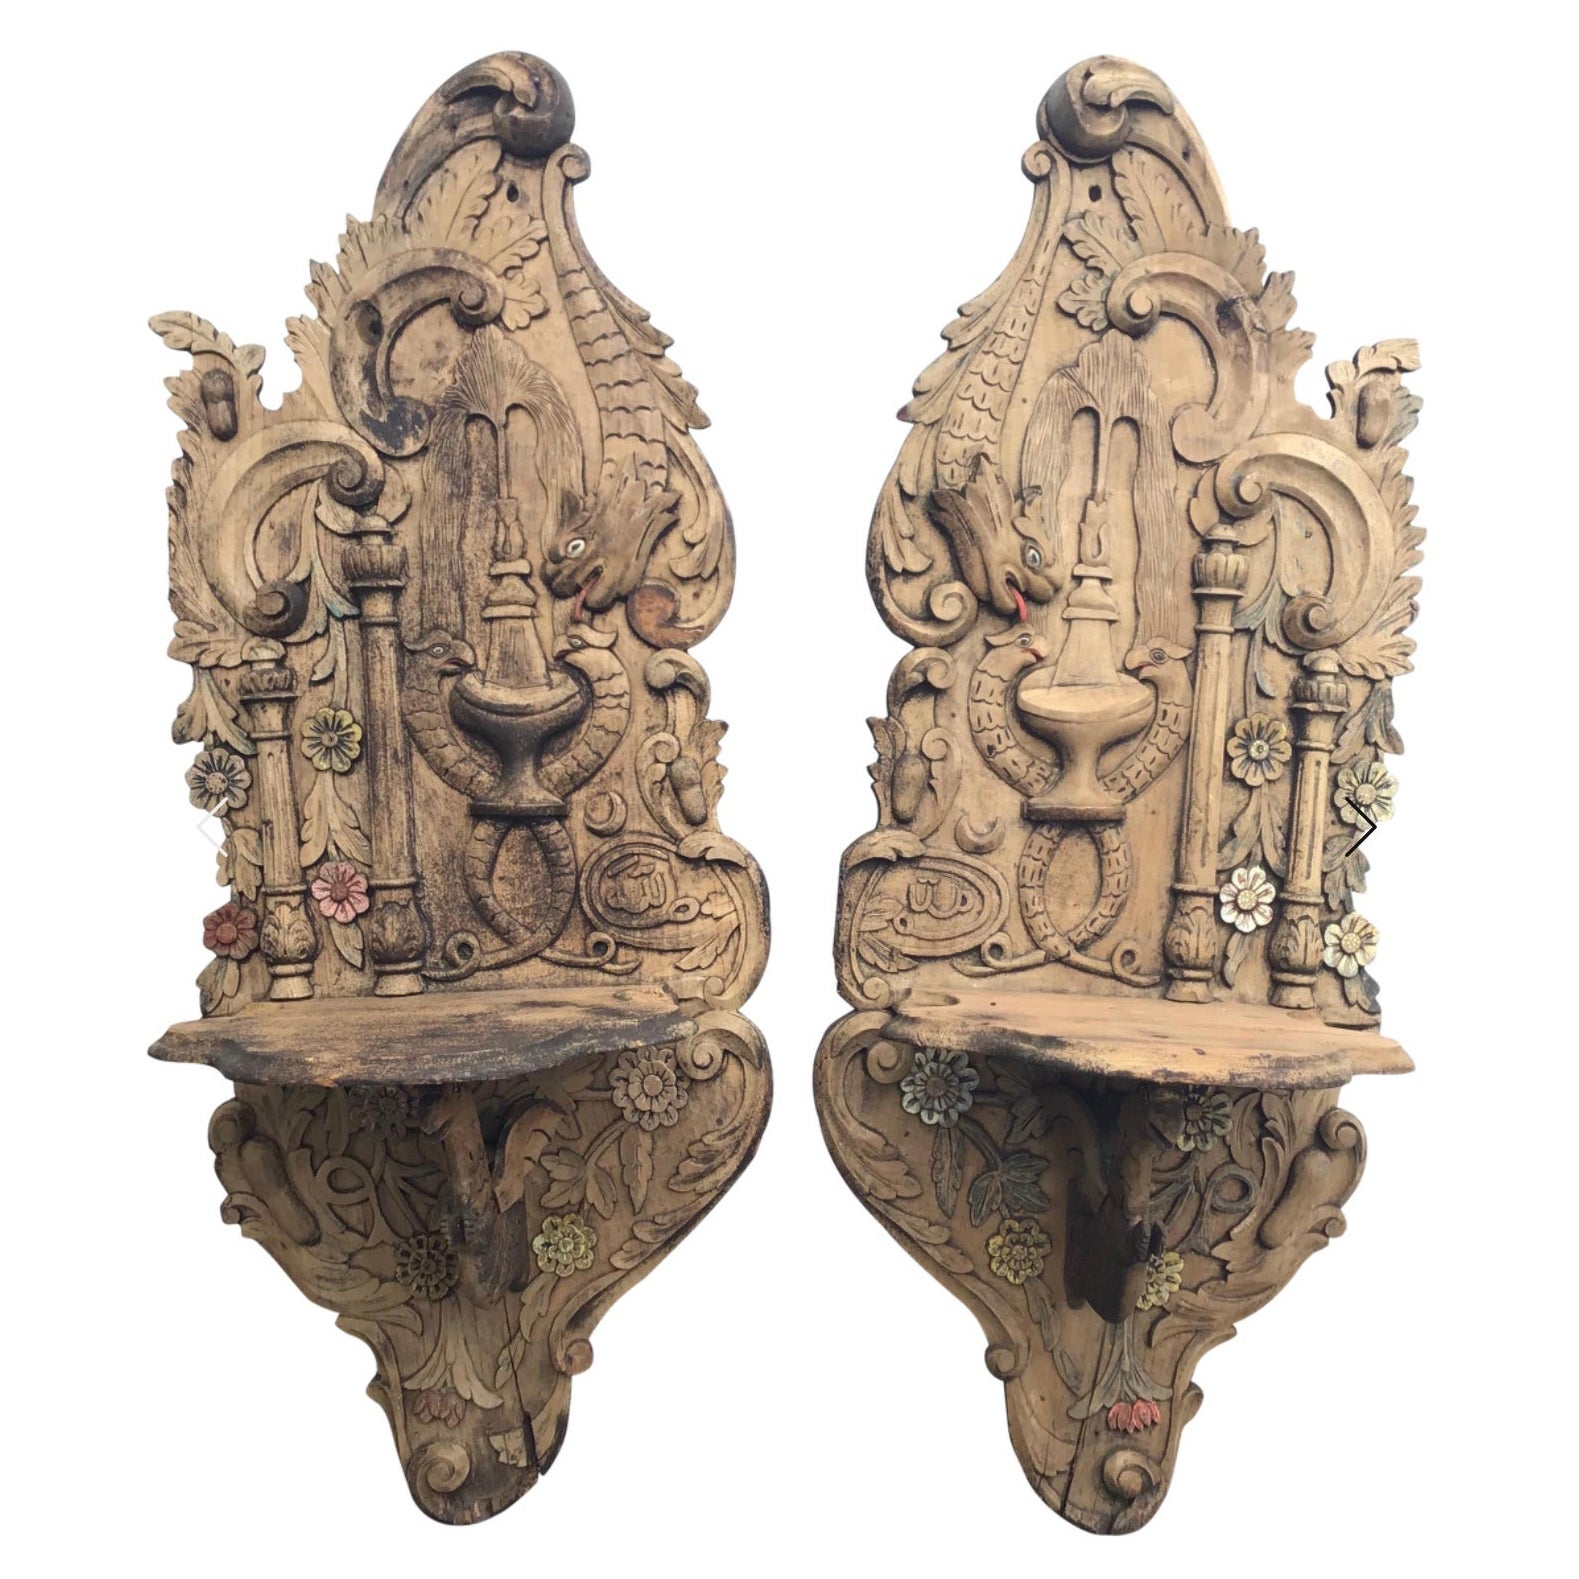 Pair of Carved Wood Wall Brackets or Turban Stands, Kavukluk